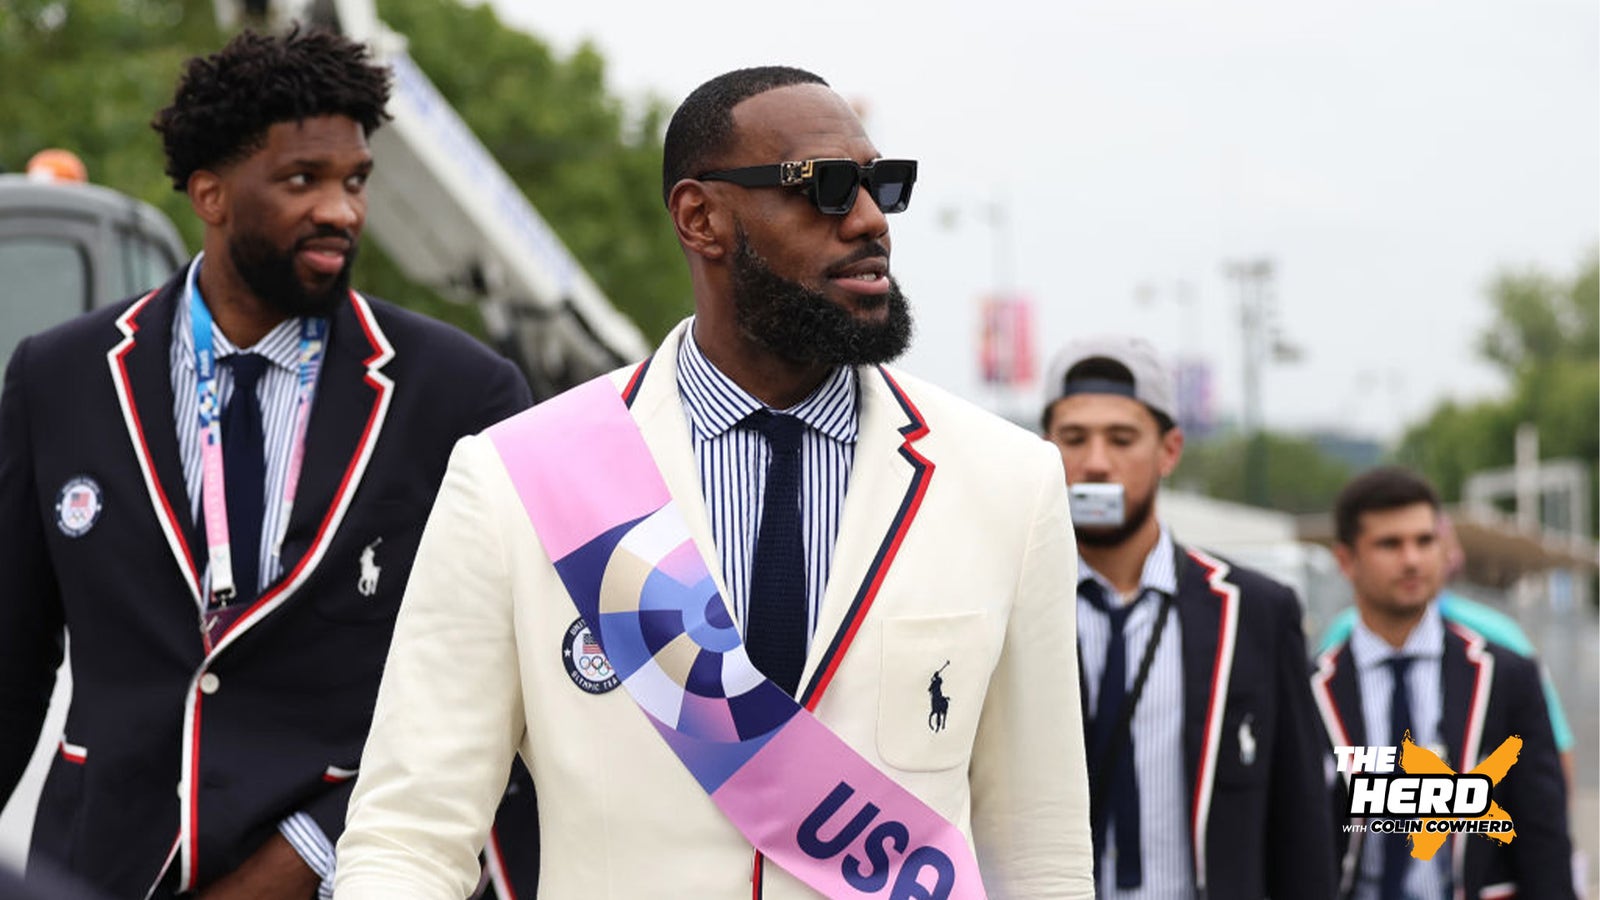 Mark Few discusses LeBron's leadership and impact on Team USA at age 39 